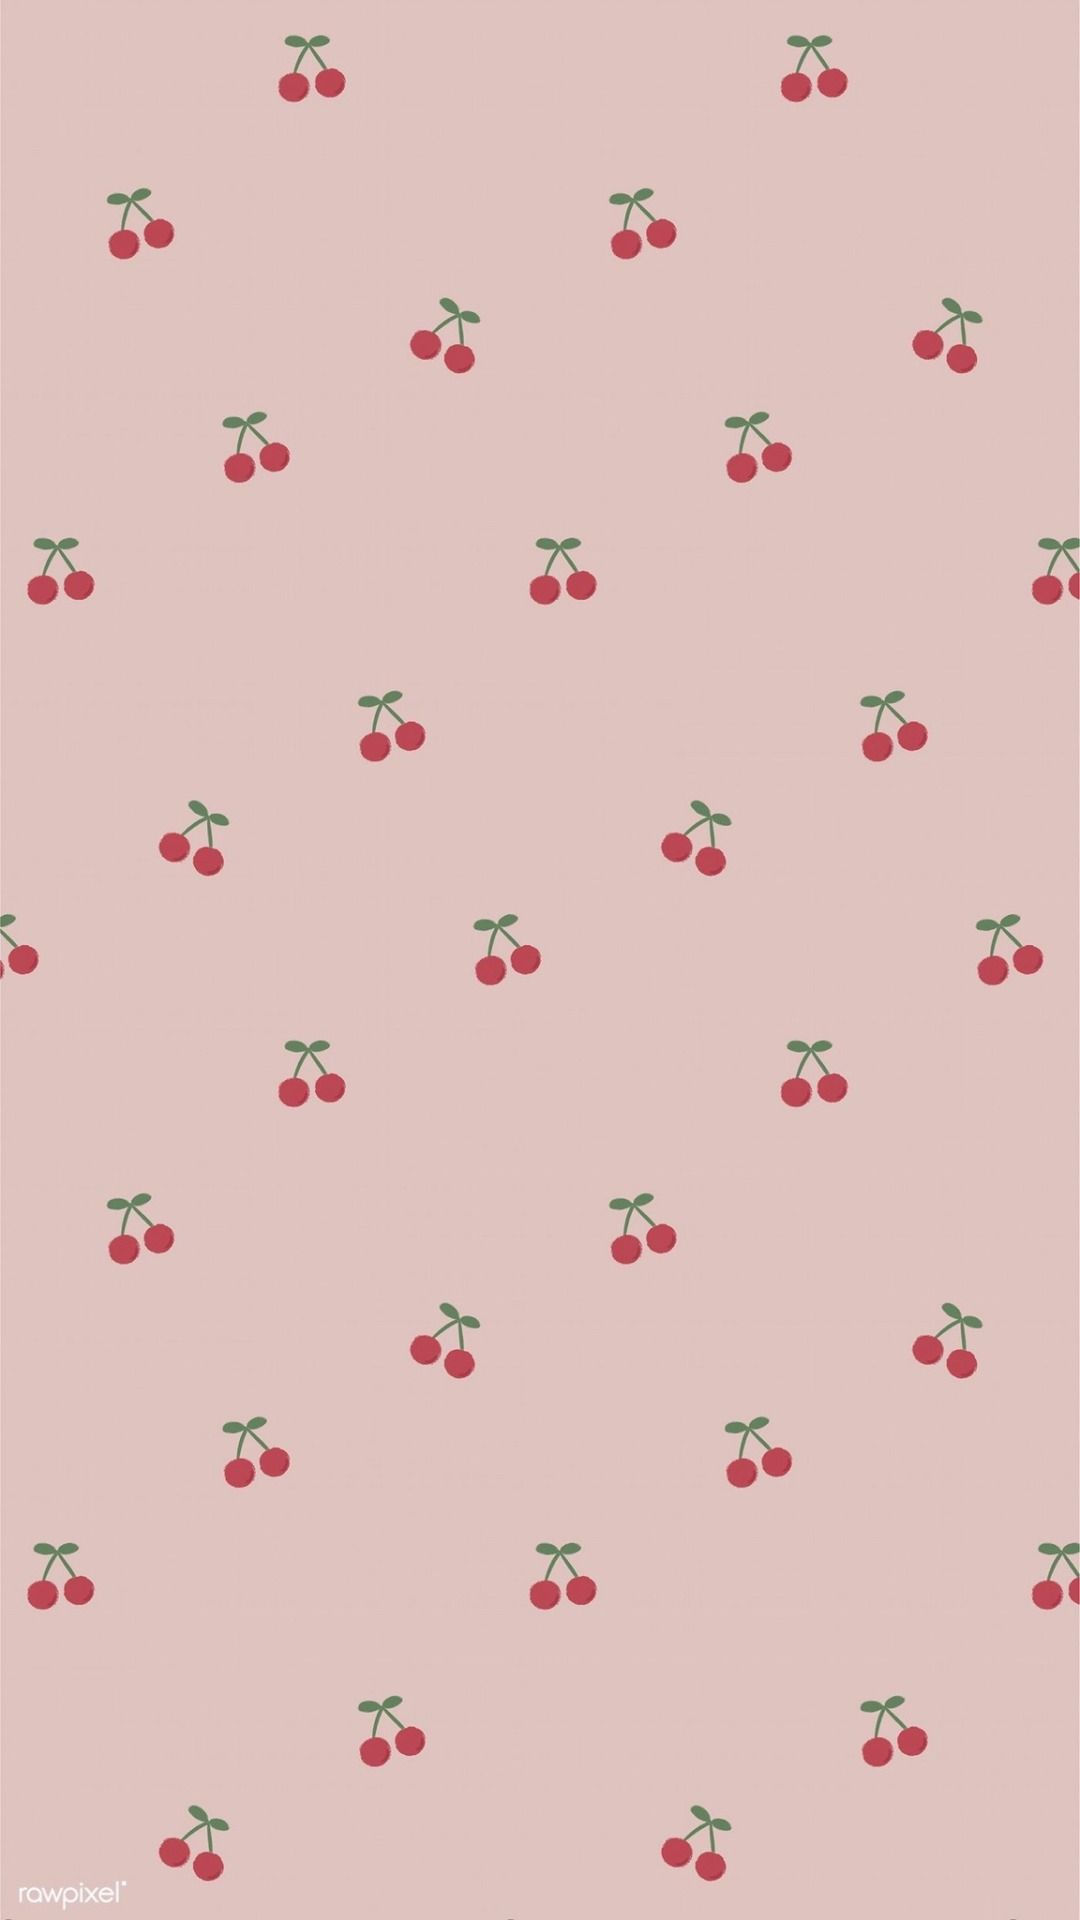 Download premium vector of Red cherry pattern on a pink background - Coquette